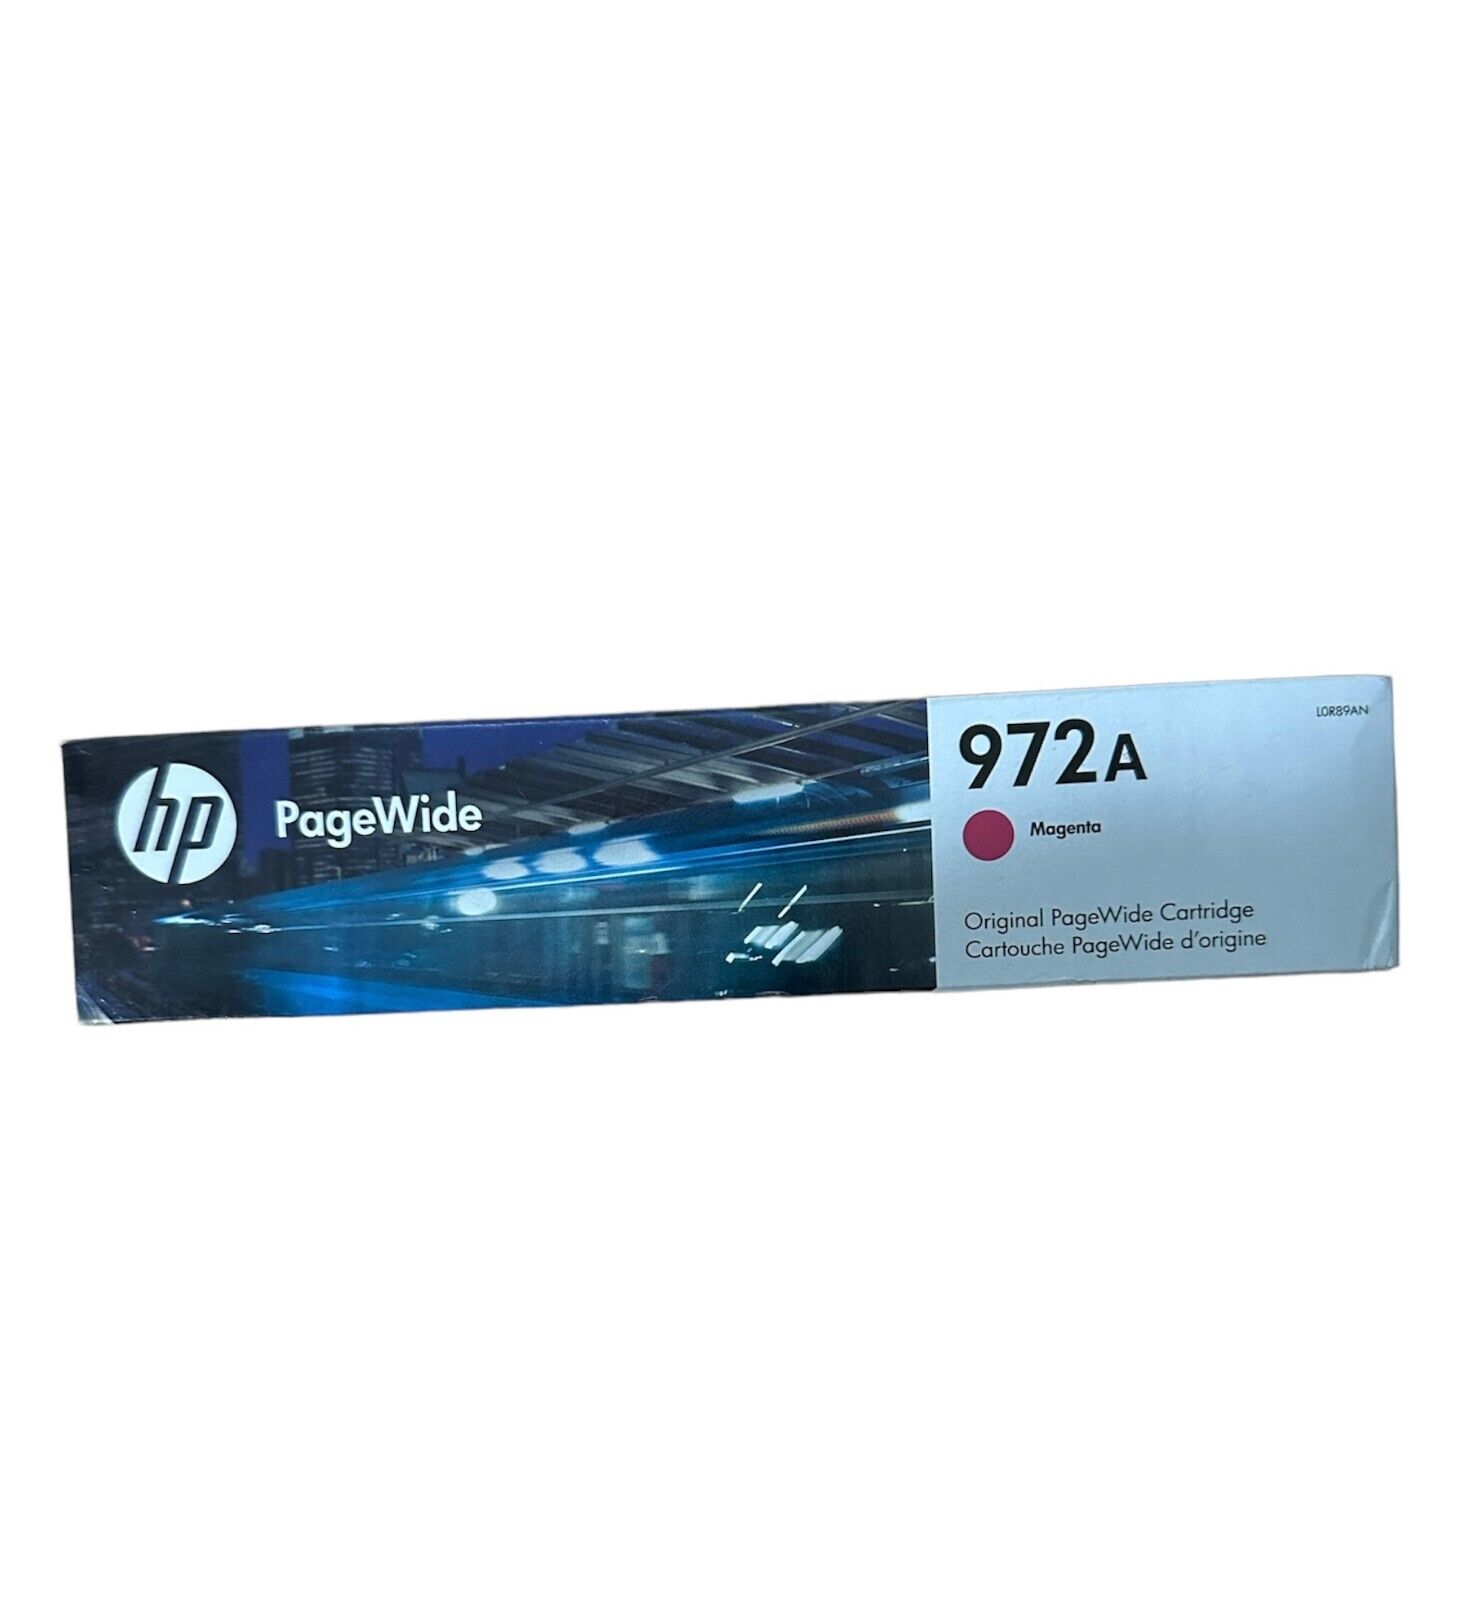 Genuine HP 972A Magenta PageWide Cartridge LOR89AN -Exp 02/26